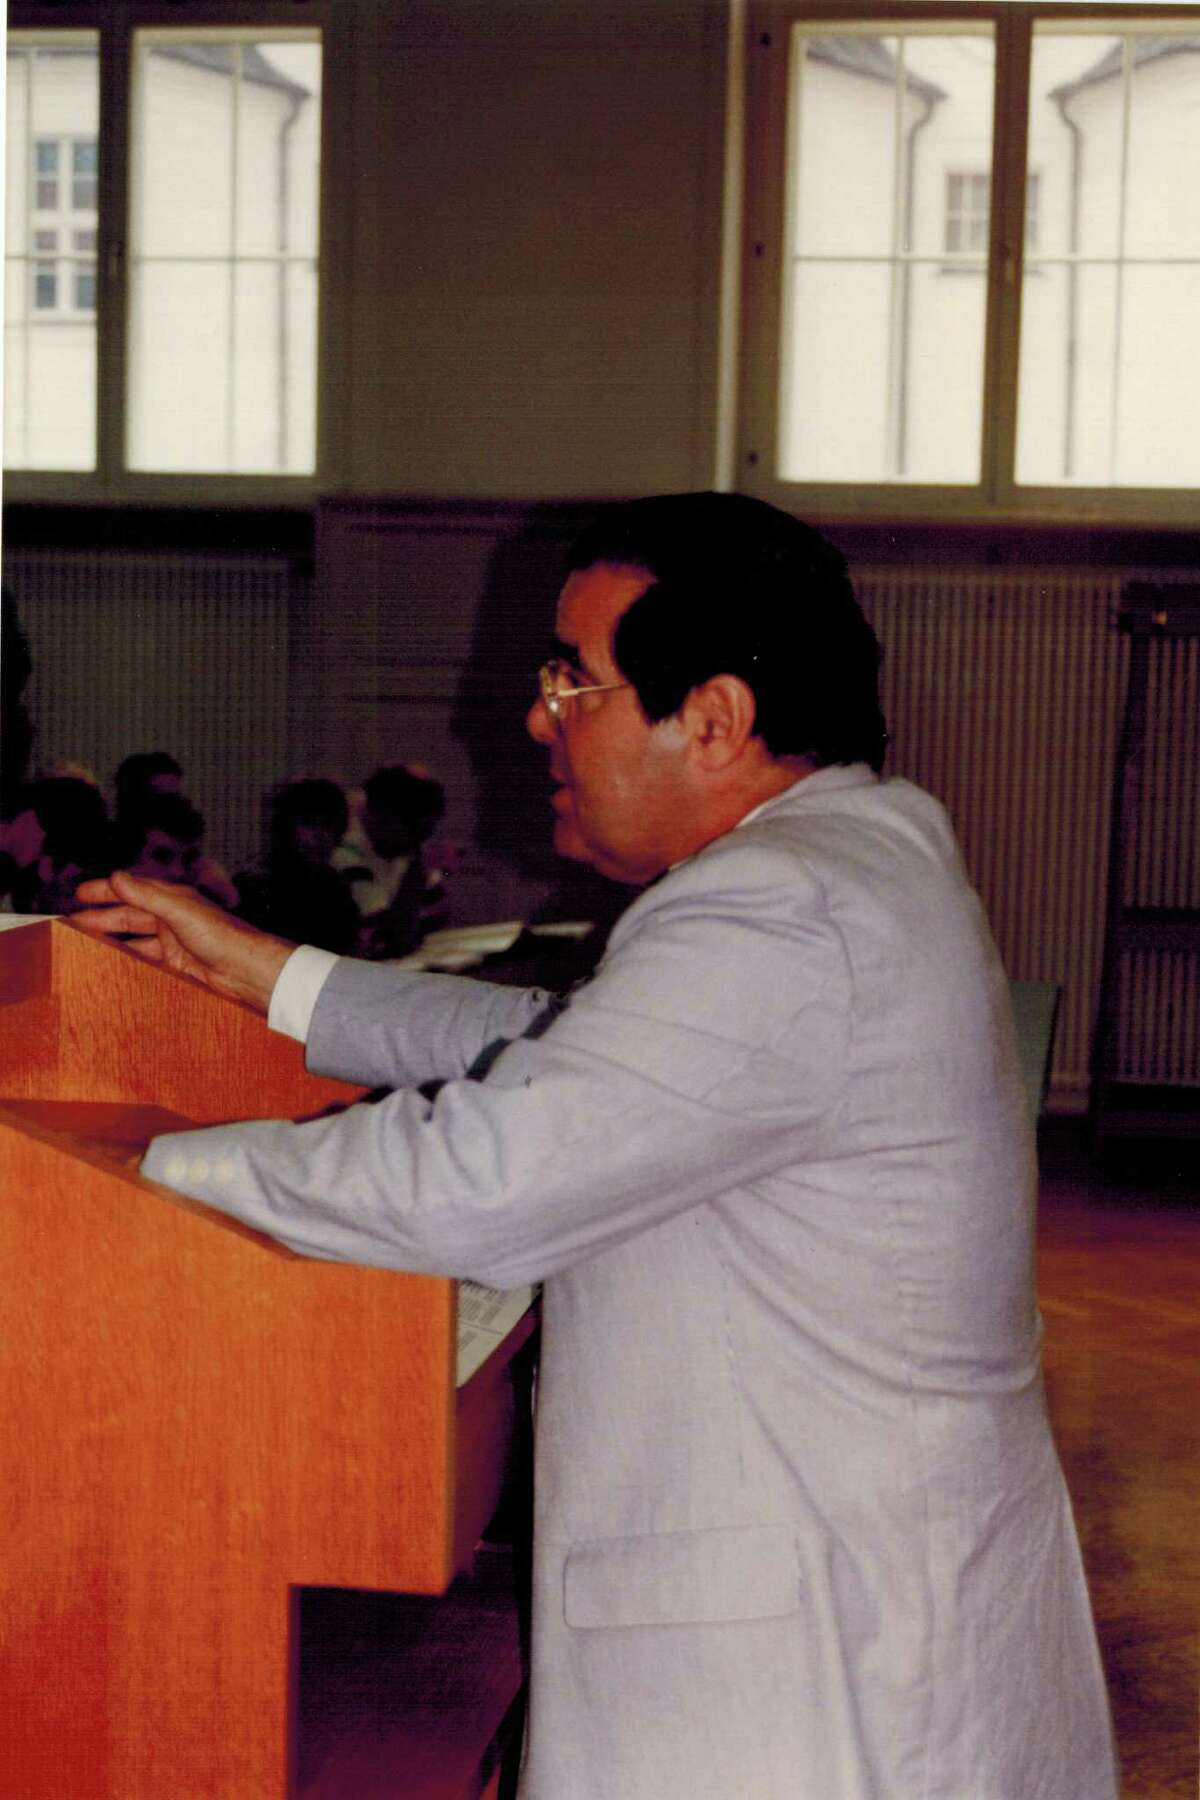 Senior U.S. Supreme Court Associate Justice Antonin Scalia teaches a class of St. Mary's University law students at the University of Innsbruck in Austria during a summer law program in 1992.